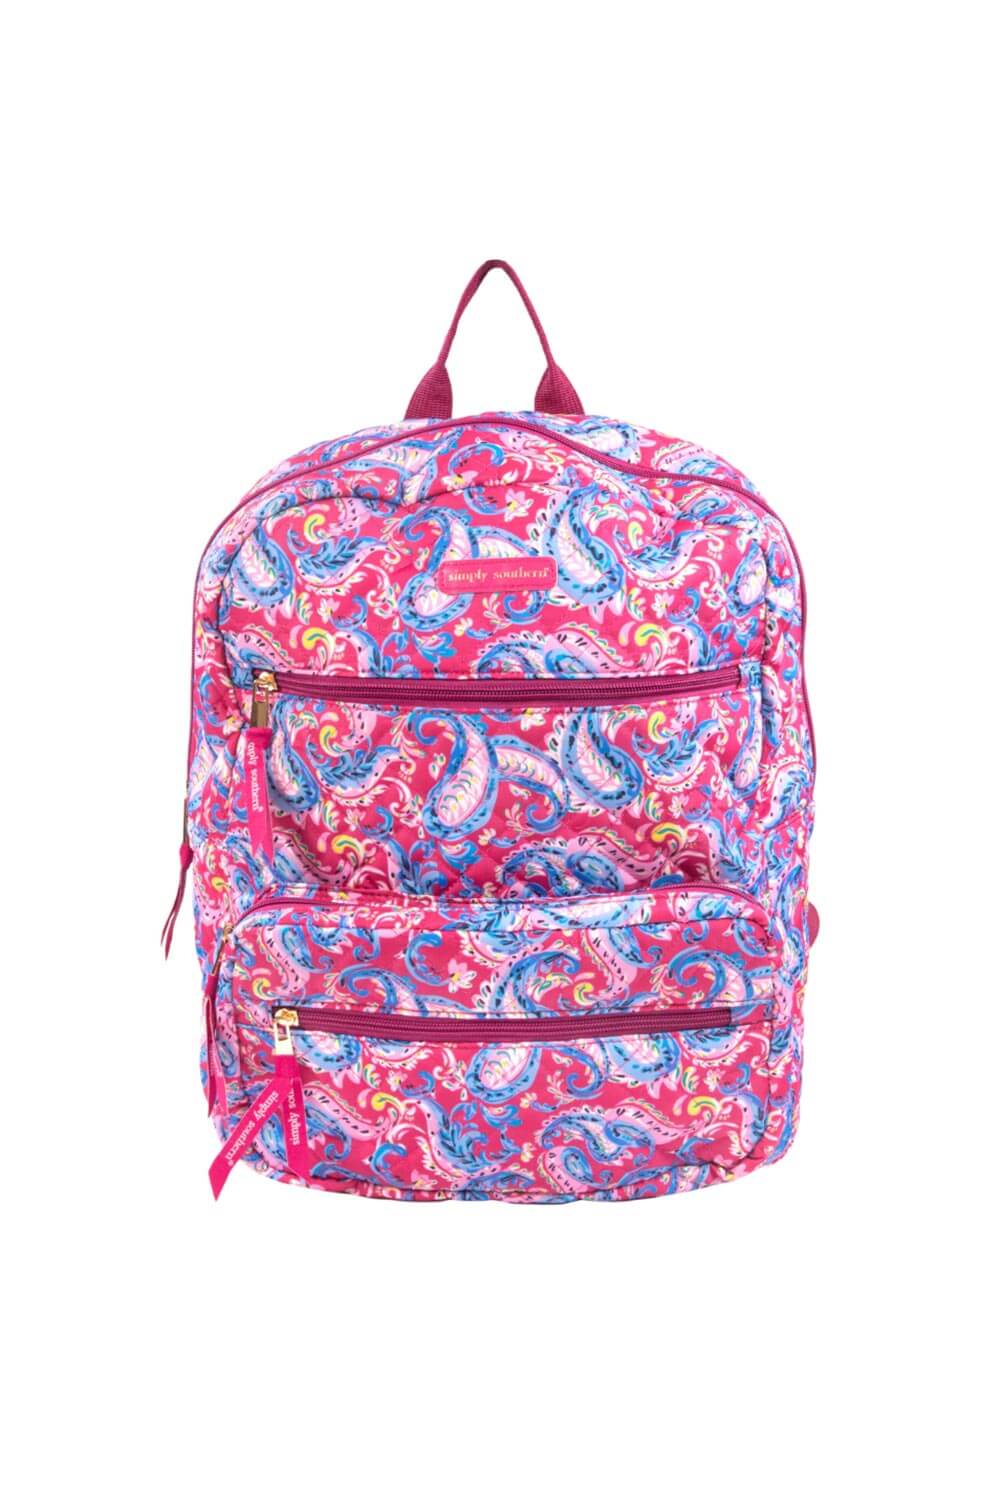 Simply Southern Quilted Backpack for Women in Paisley